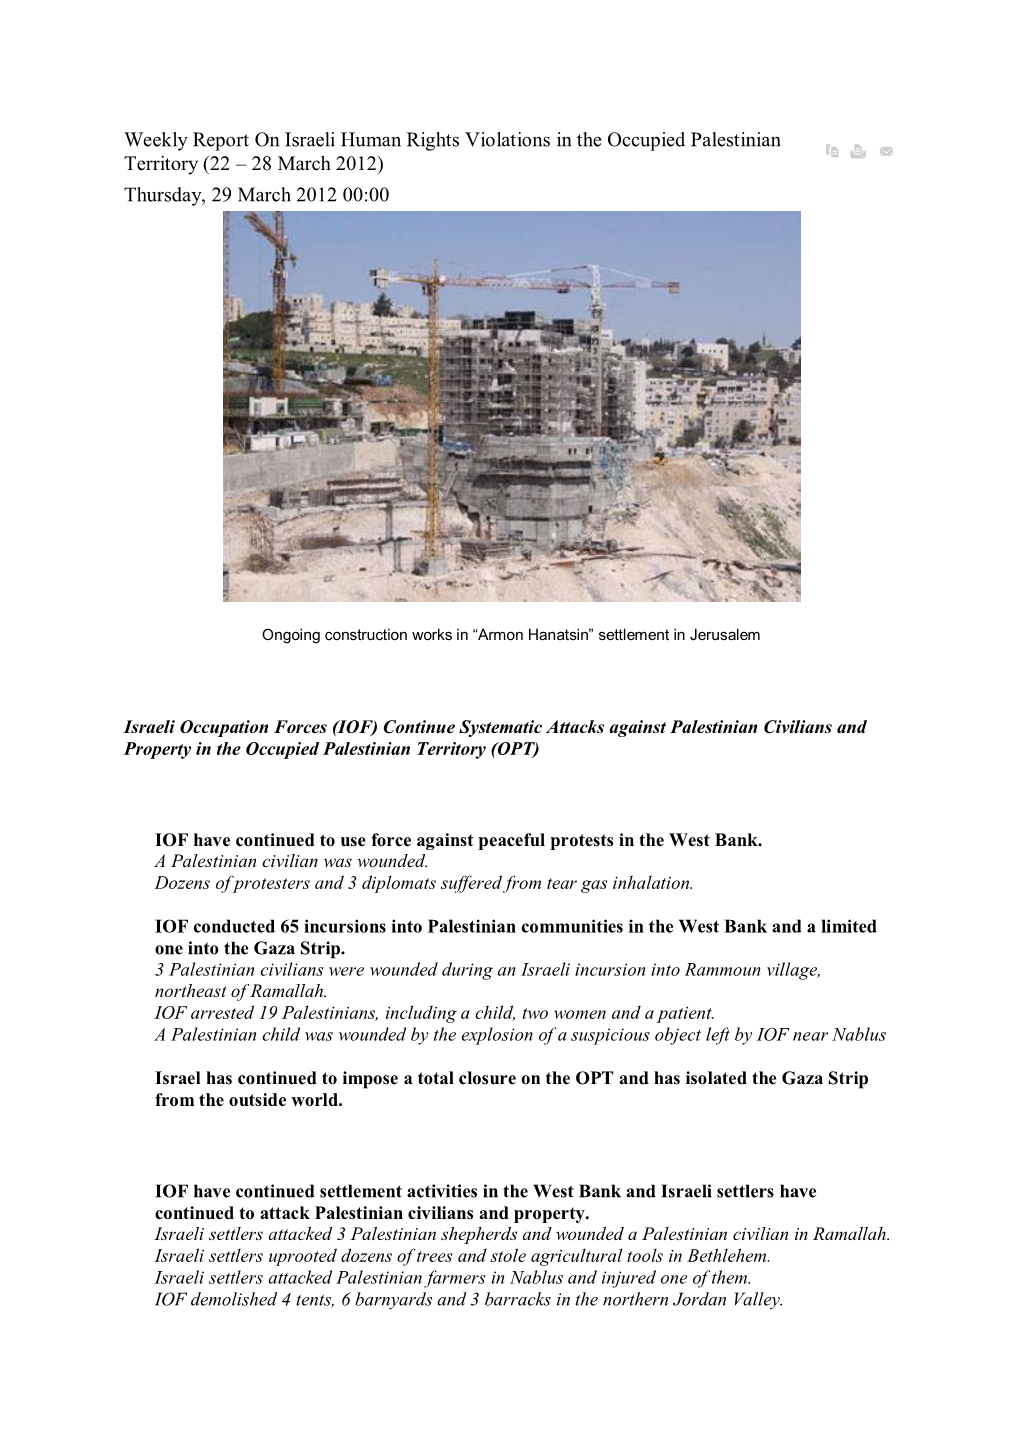 Weekly Report on Israeli Human Rights Violations in the Occupied Palestinian Territory (22 – 28 March 2012) Thursday, 29 March 2012 00:00